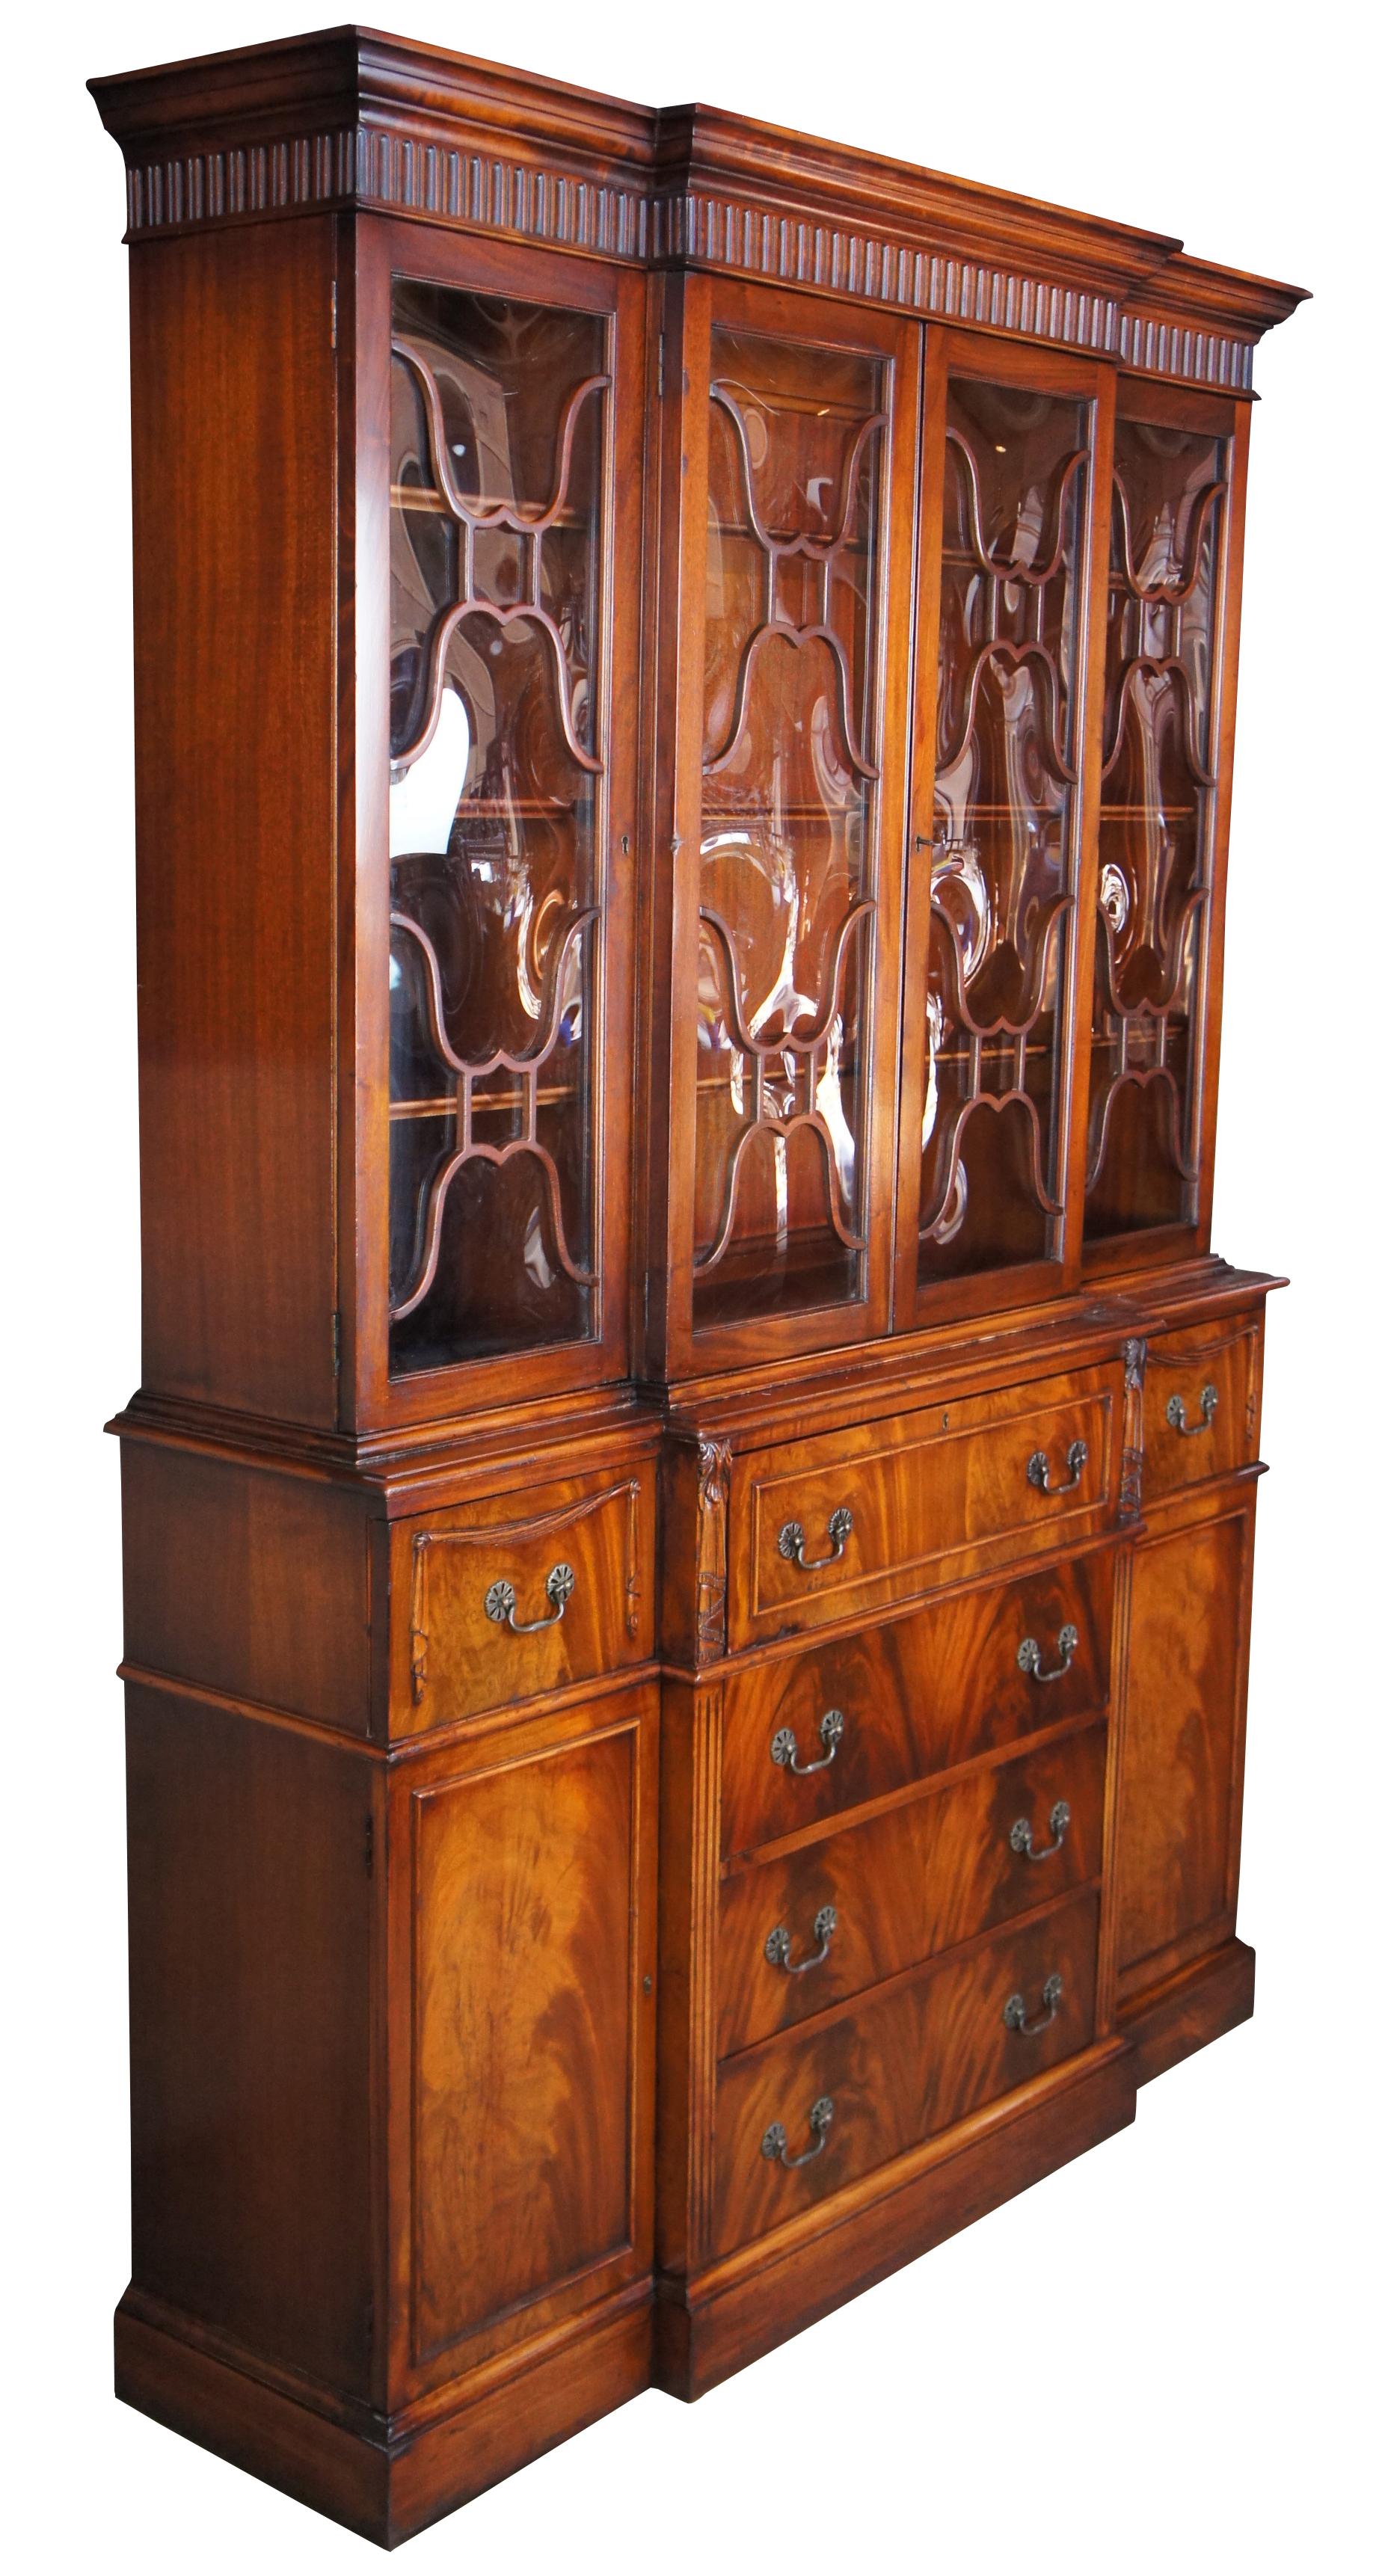 Antique Saginaw Furniture flame mahogany breakfront china cabinet featuring Neoclassical styling with fretwork bubble glass doors, lower cabinet and drawers, and a drop front butlers writing secretary or desk with tooled leather top and cubbies for